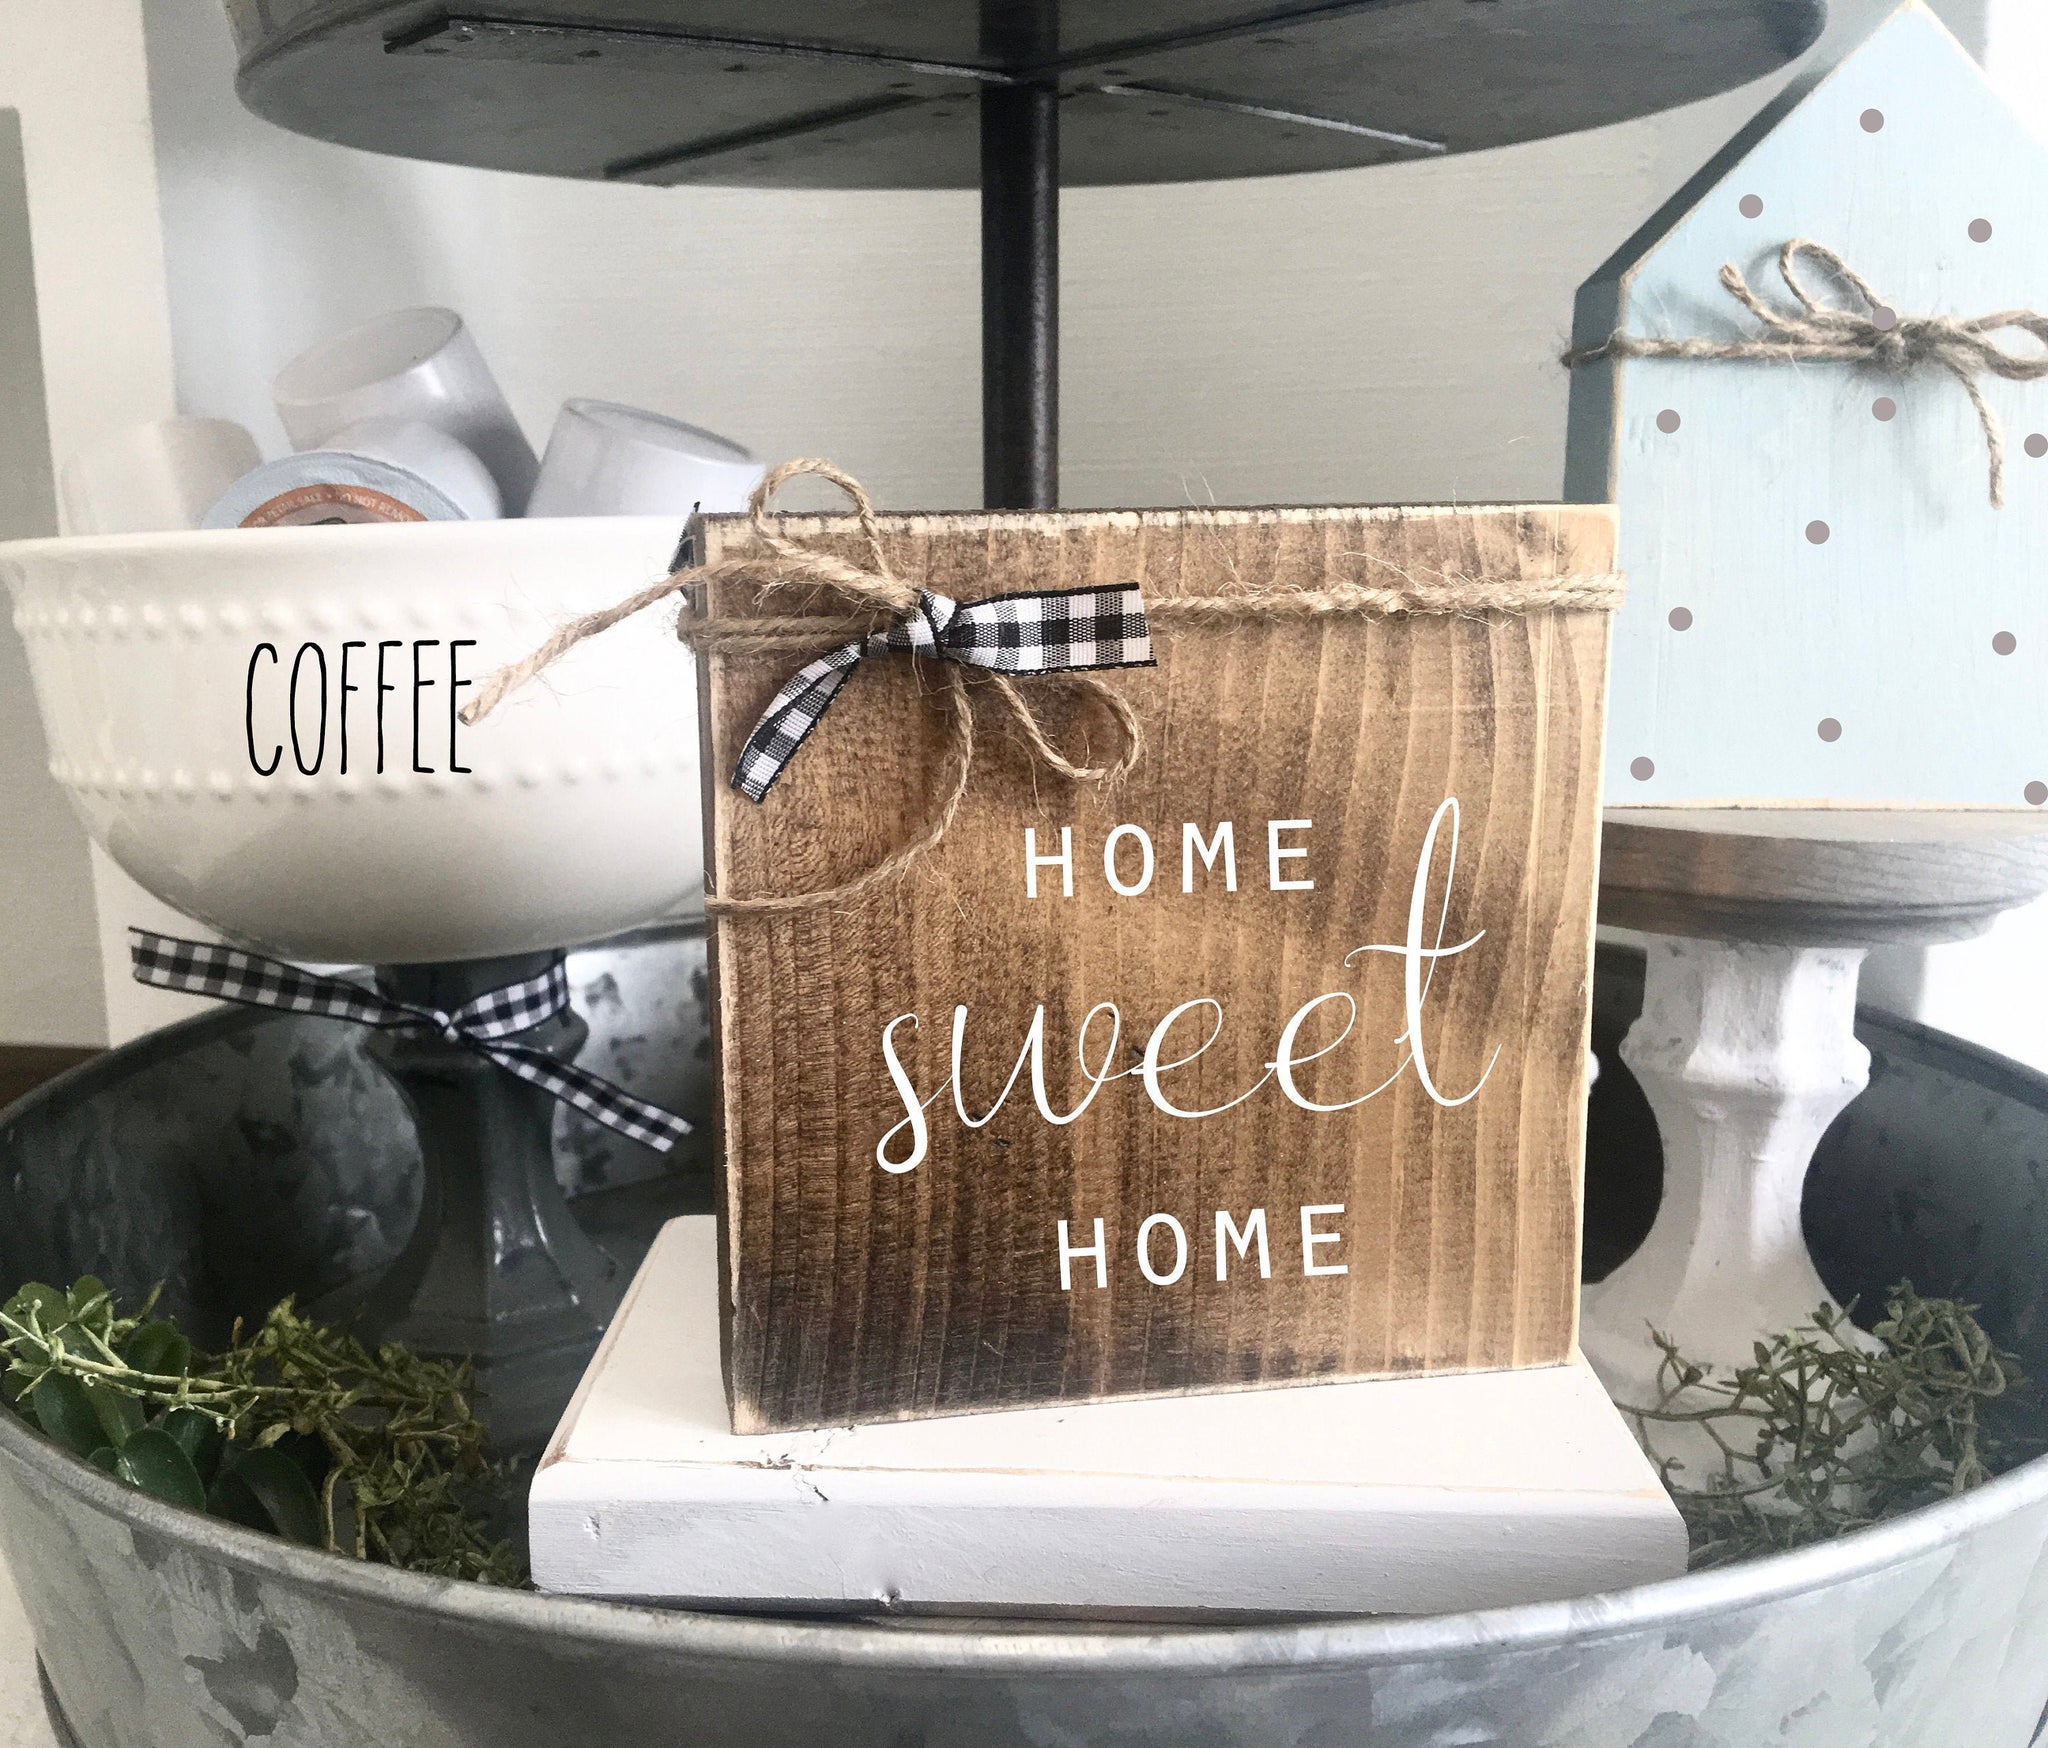 Home sweet home- Tiered tray sign- Coffee bar decor- Mini sign- Home decor- Housewarming gift- New home- Farmhouse- Wood sign- Wooden block